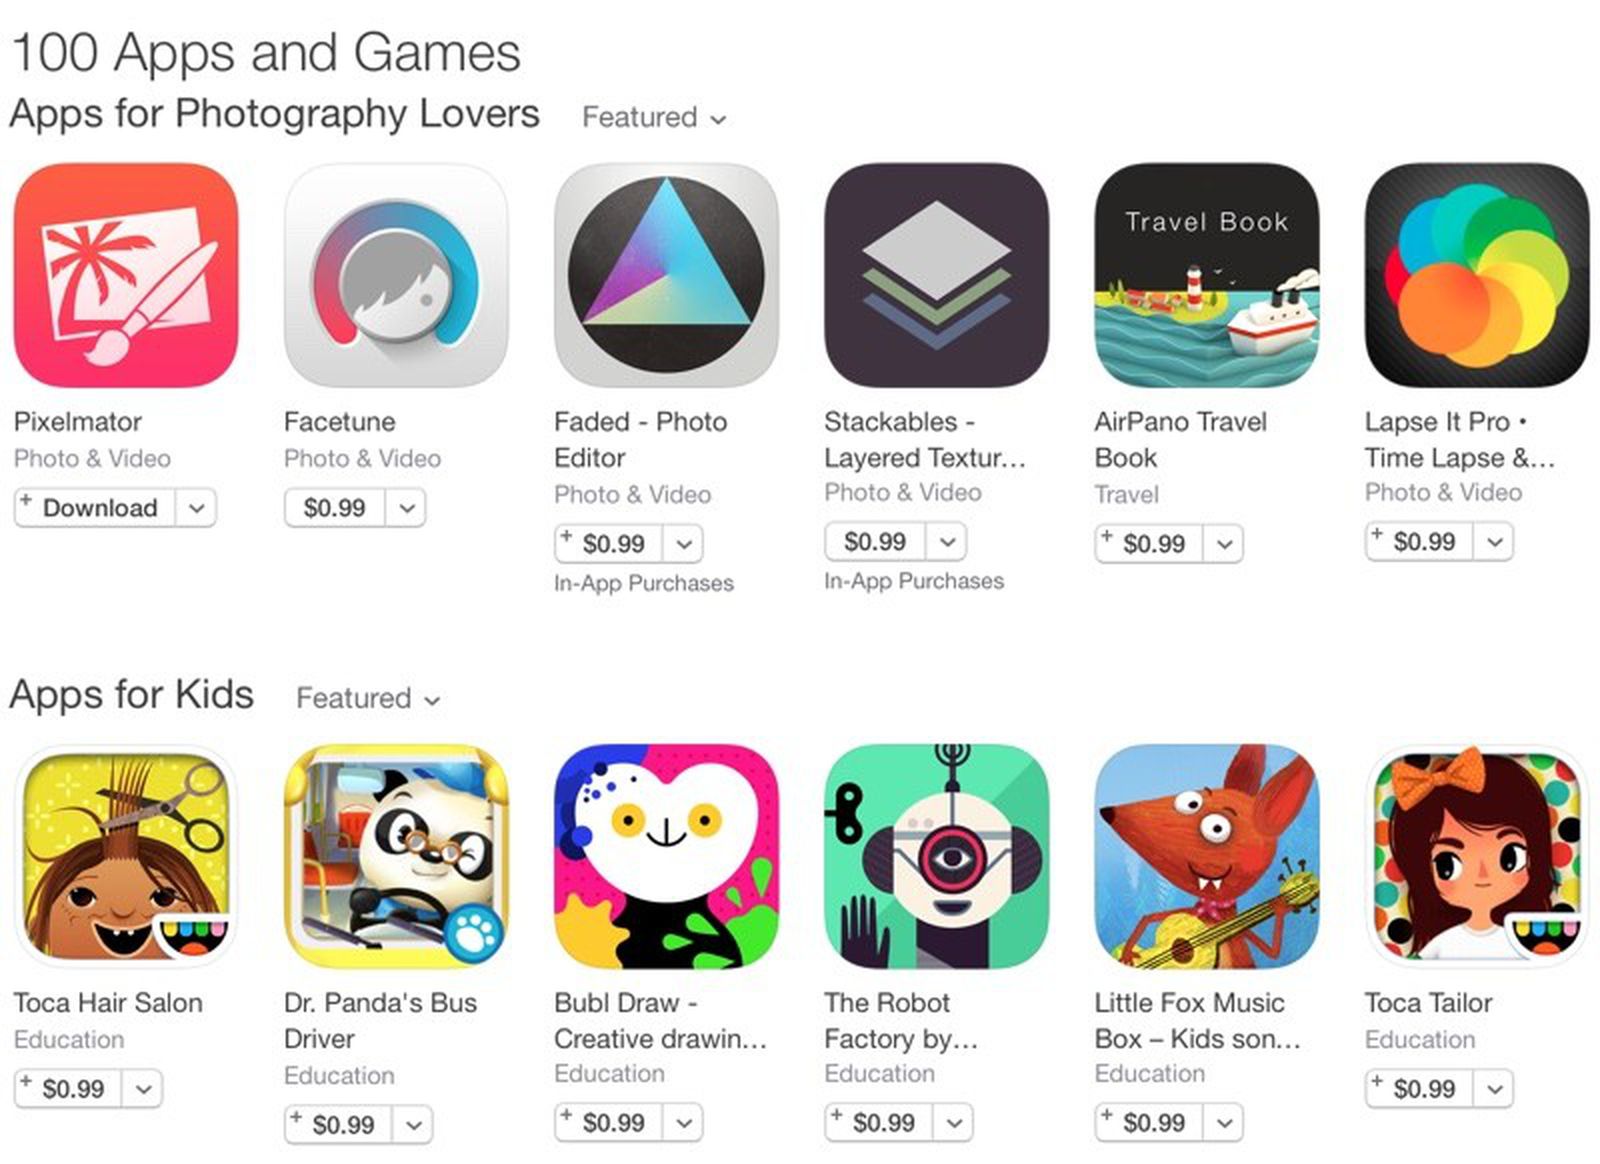 Video Games & Apps